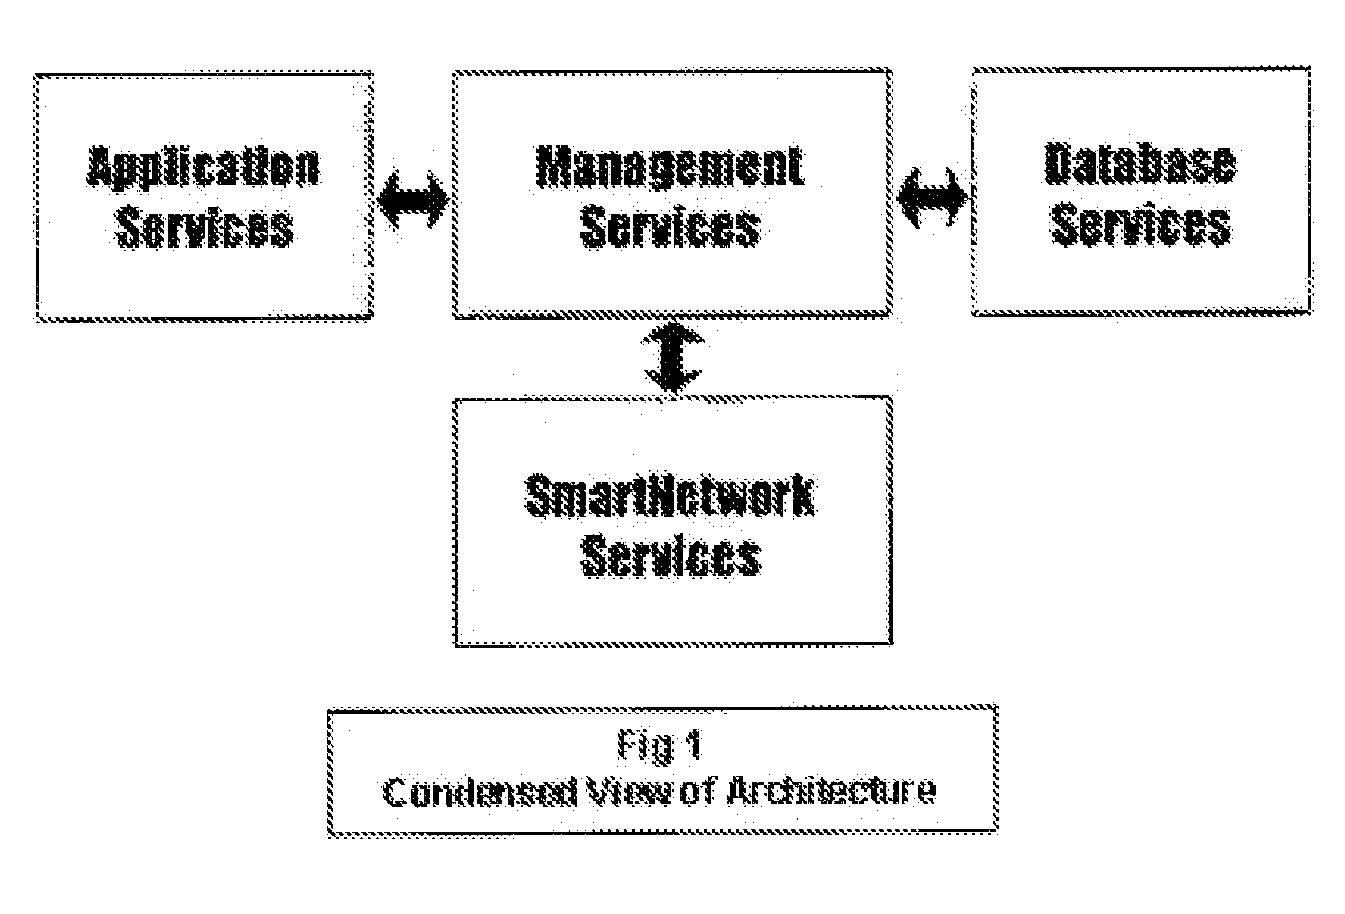 Method for smart device network application infrastructure (SDNA)